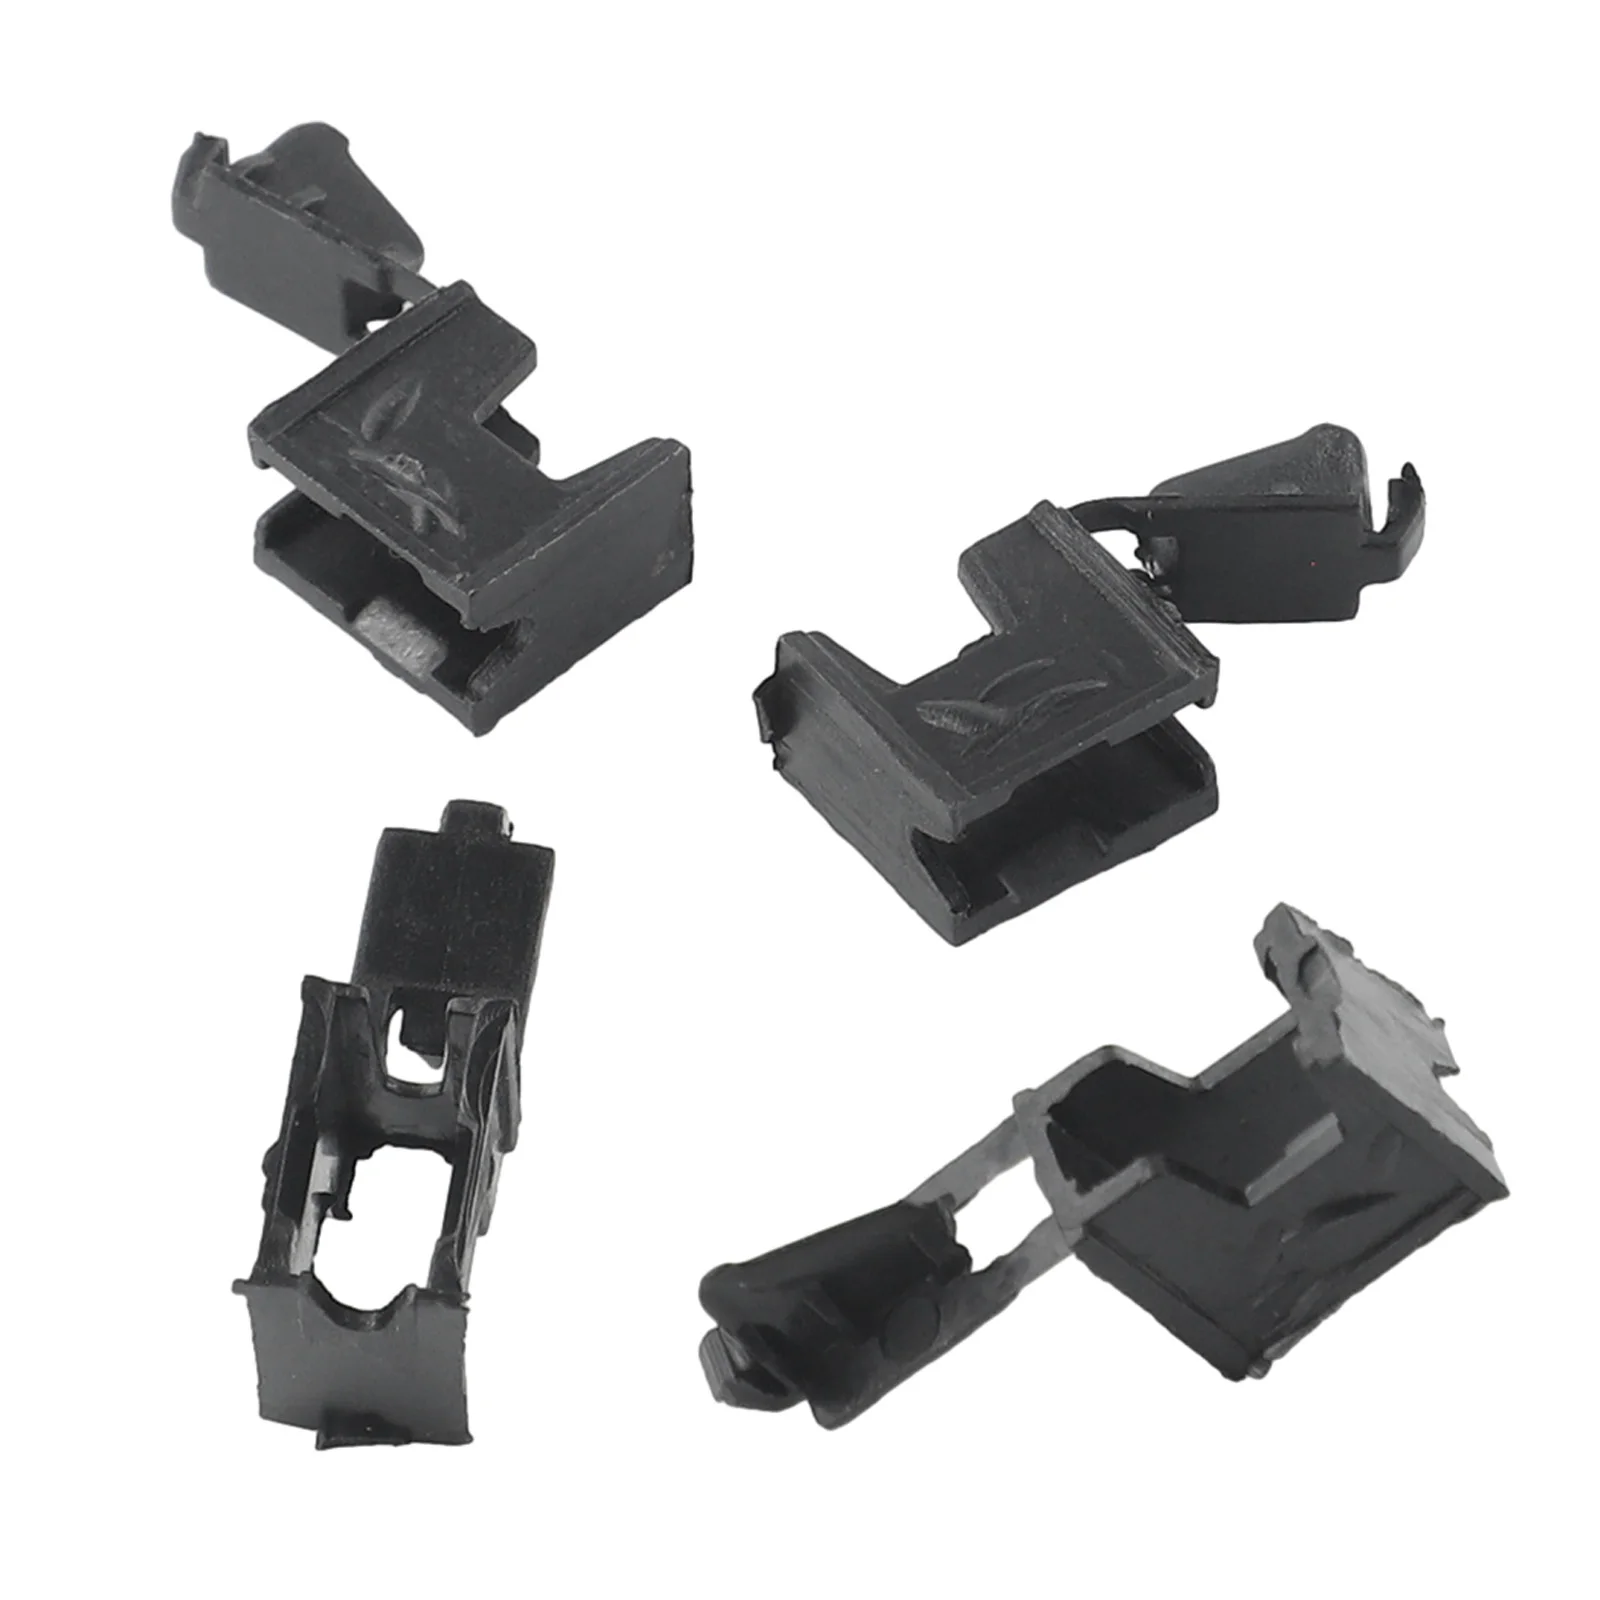 Brand New Cover Kit Part Accessories Clips Kit Convertible Roof For BMW E93 330i M3 F33 440i Plastic Practical